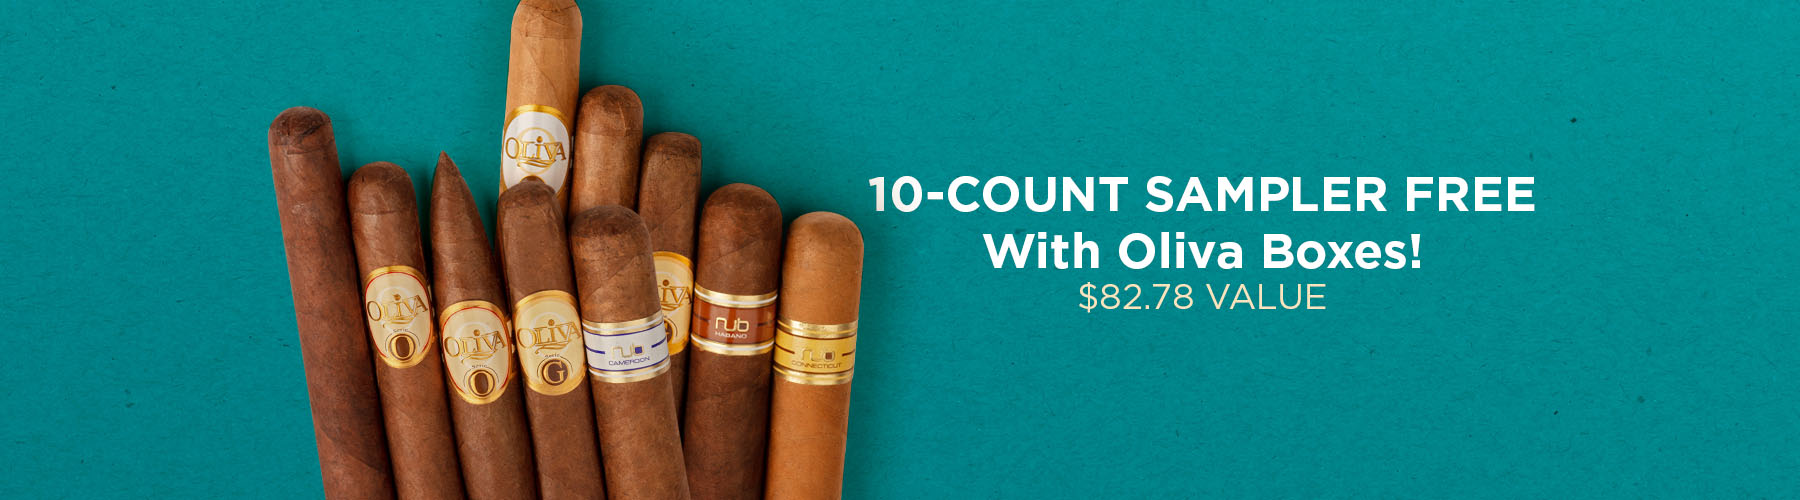 10-Count Sampler free with Oliva boxes! $82.78 Value